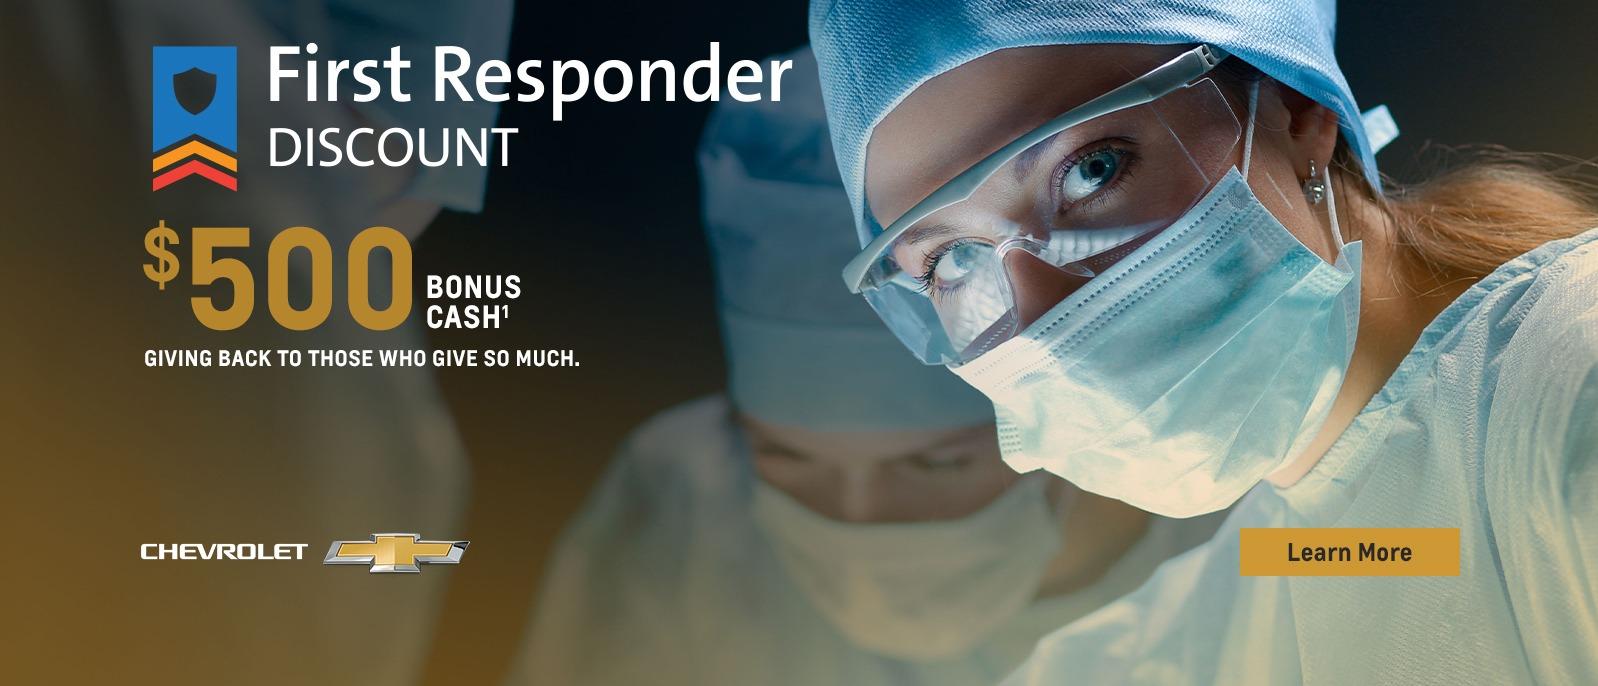 Giving back for all that you give. Chevy Celebrates First Responders. $500 Bonus cash.